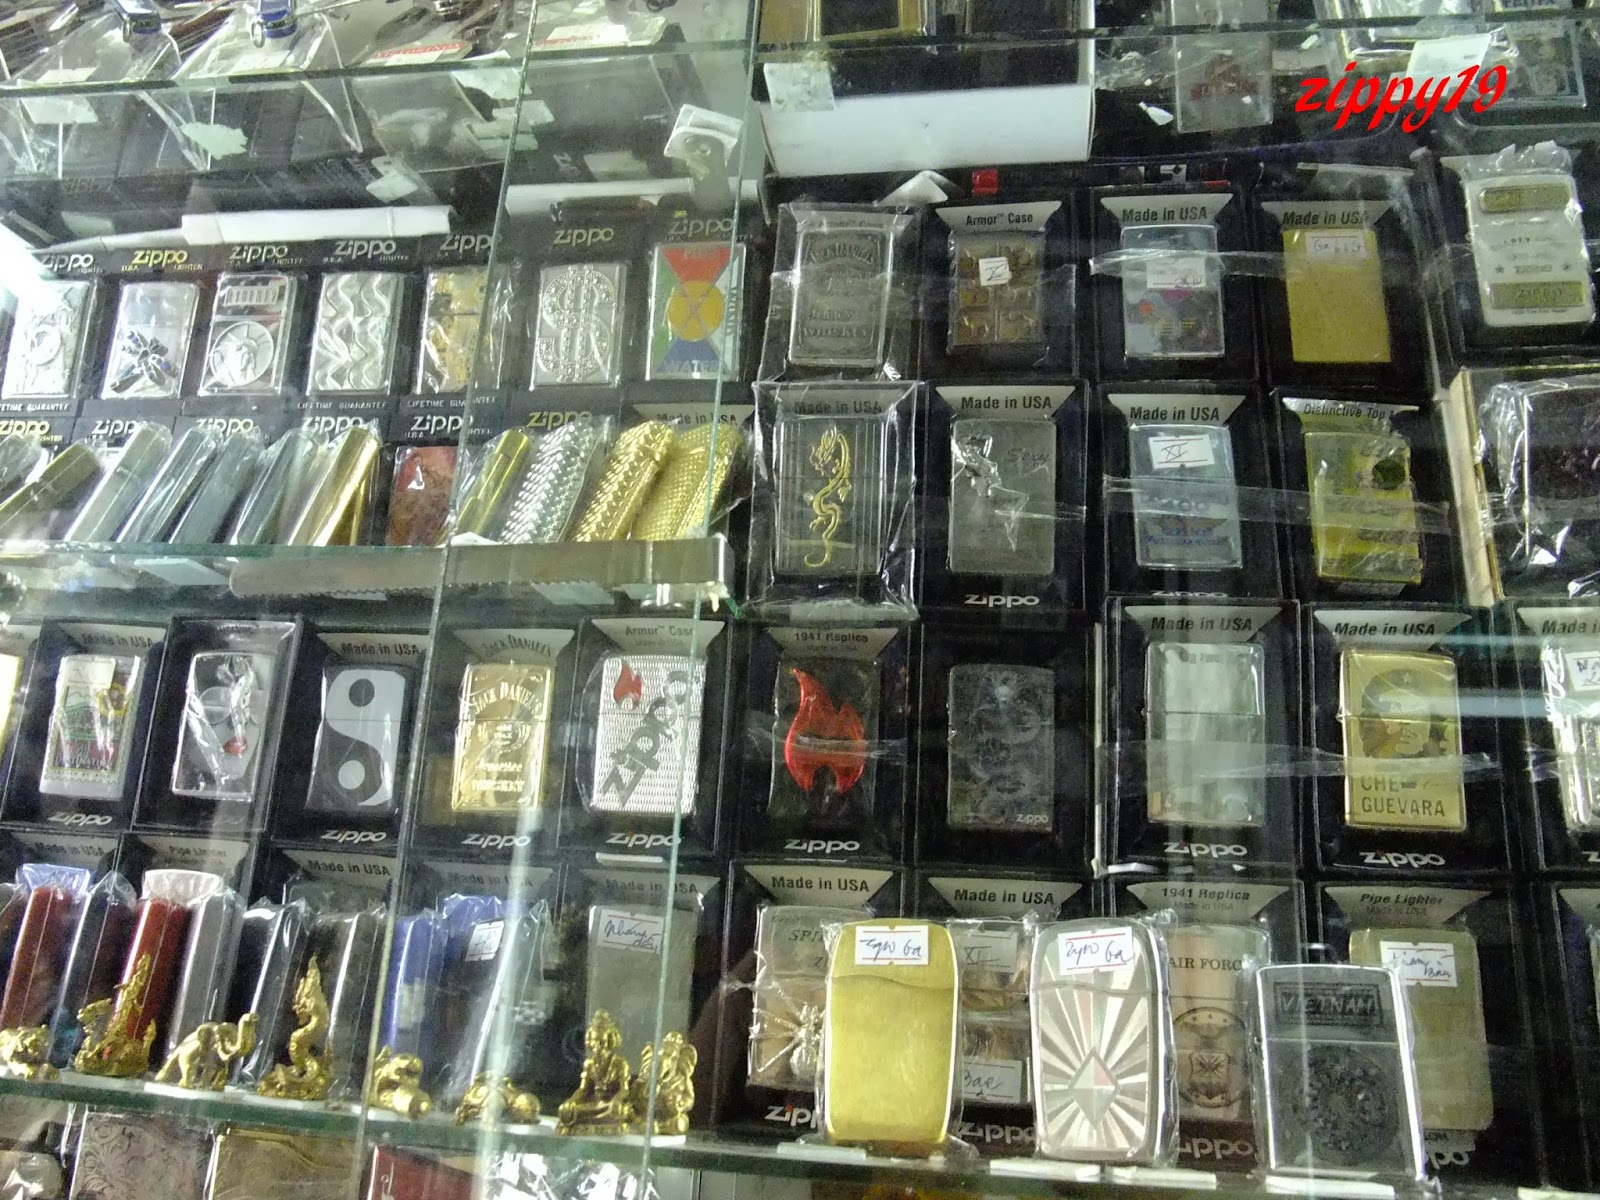 Zippo lighters - A lifelong obsession: Zippo Lighters in Vietnam Ho Chi